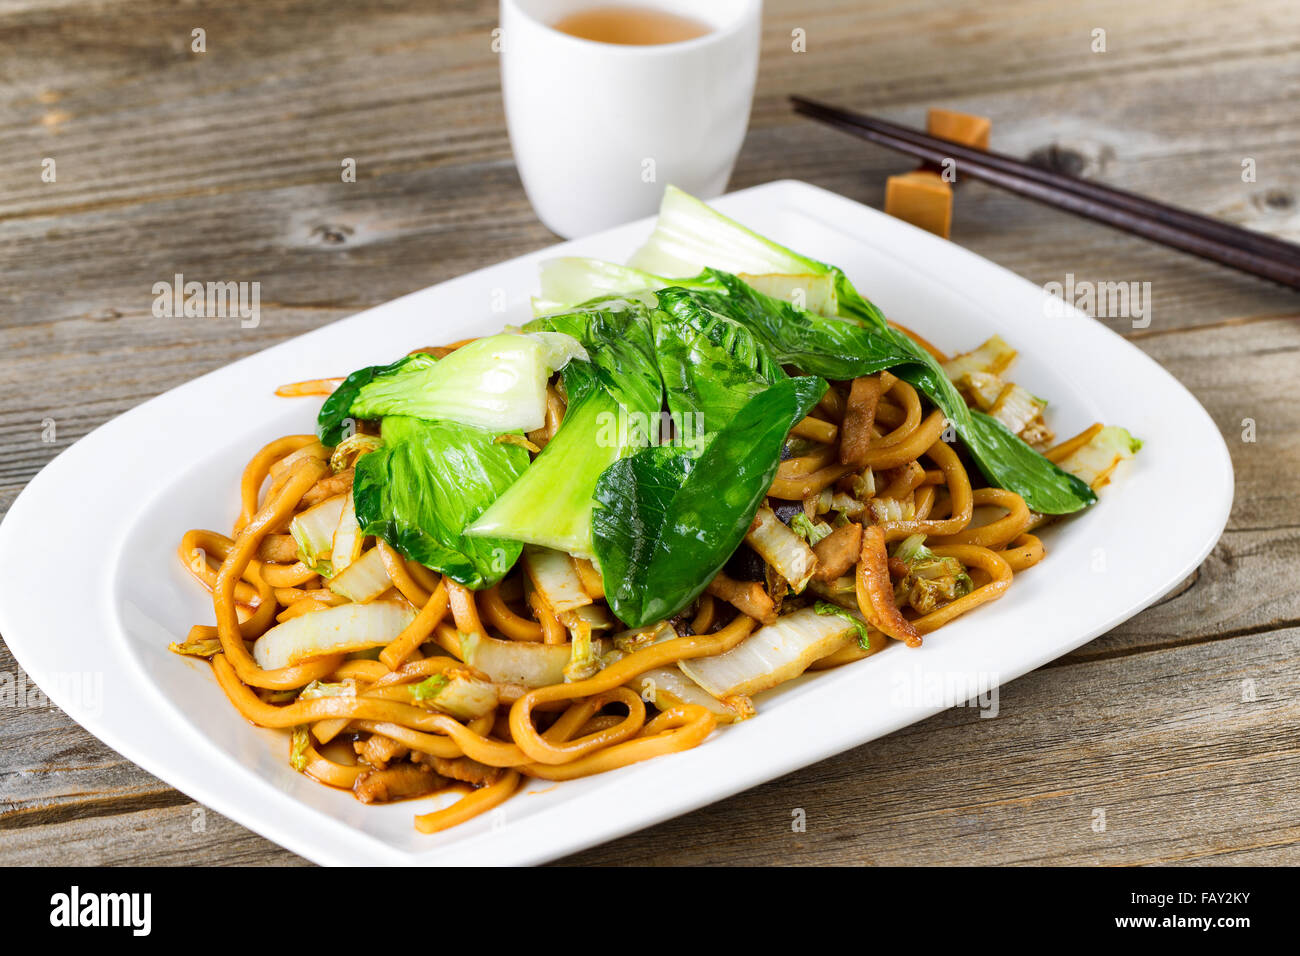 Close up front view of spicy cooked noodles, onion, bok choy, and chicken slices. Chopsticks and tea in background Stock Photo